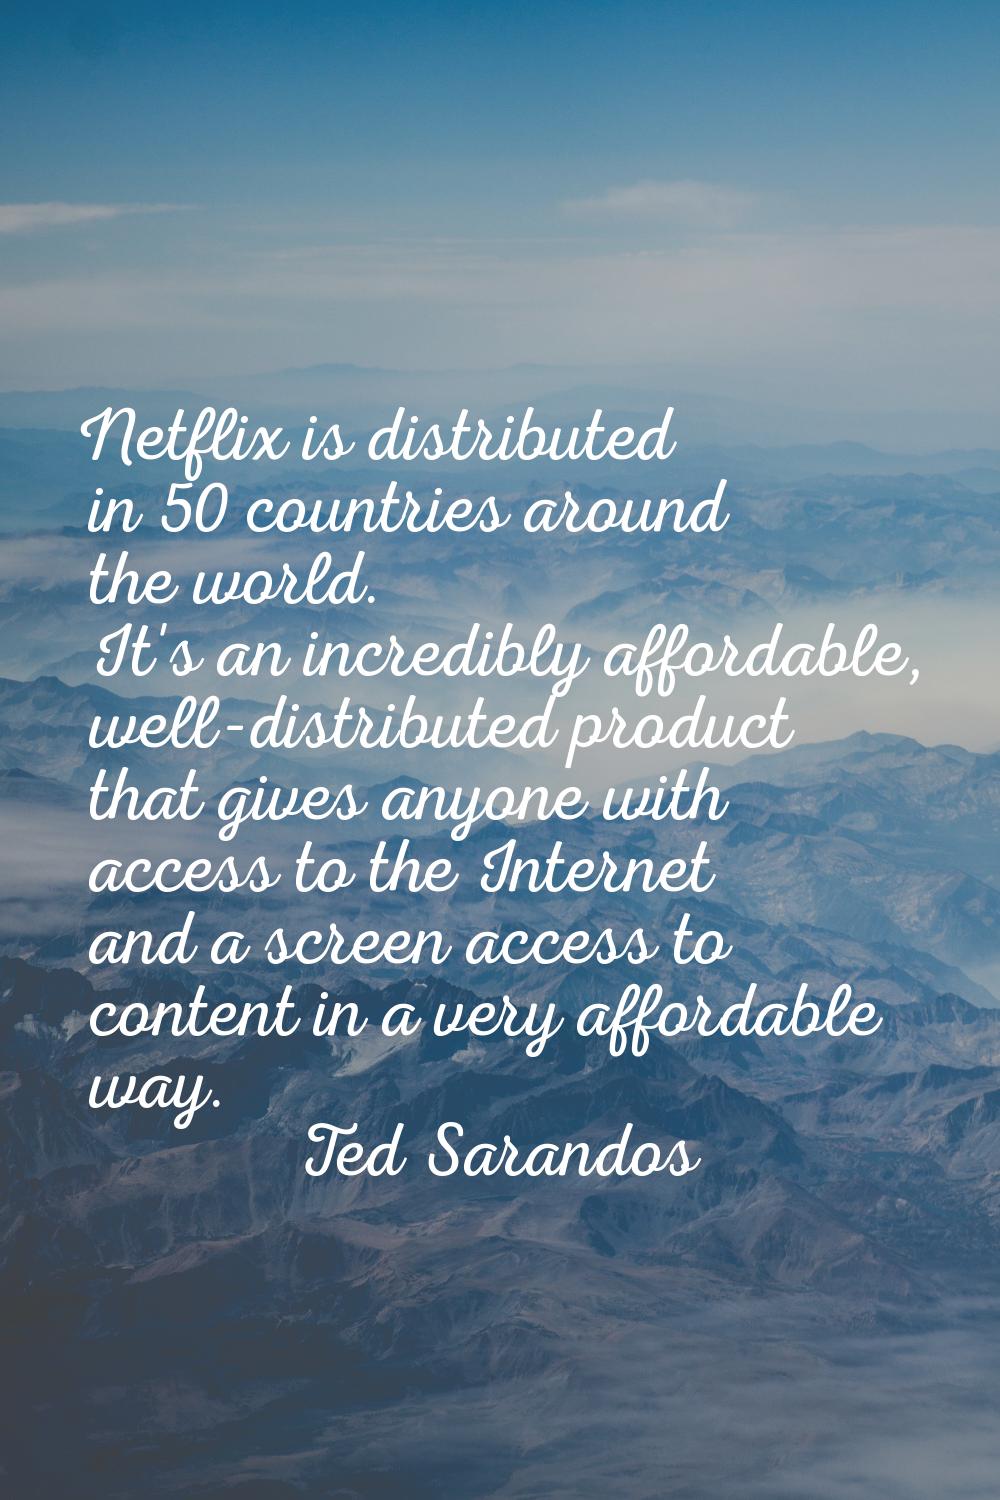 Netflix is distributed in 50 countries around the world. It's an incredibly affordable, well-distri